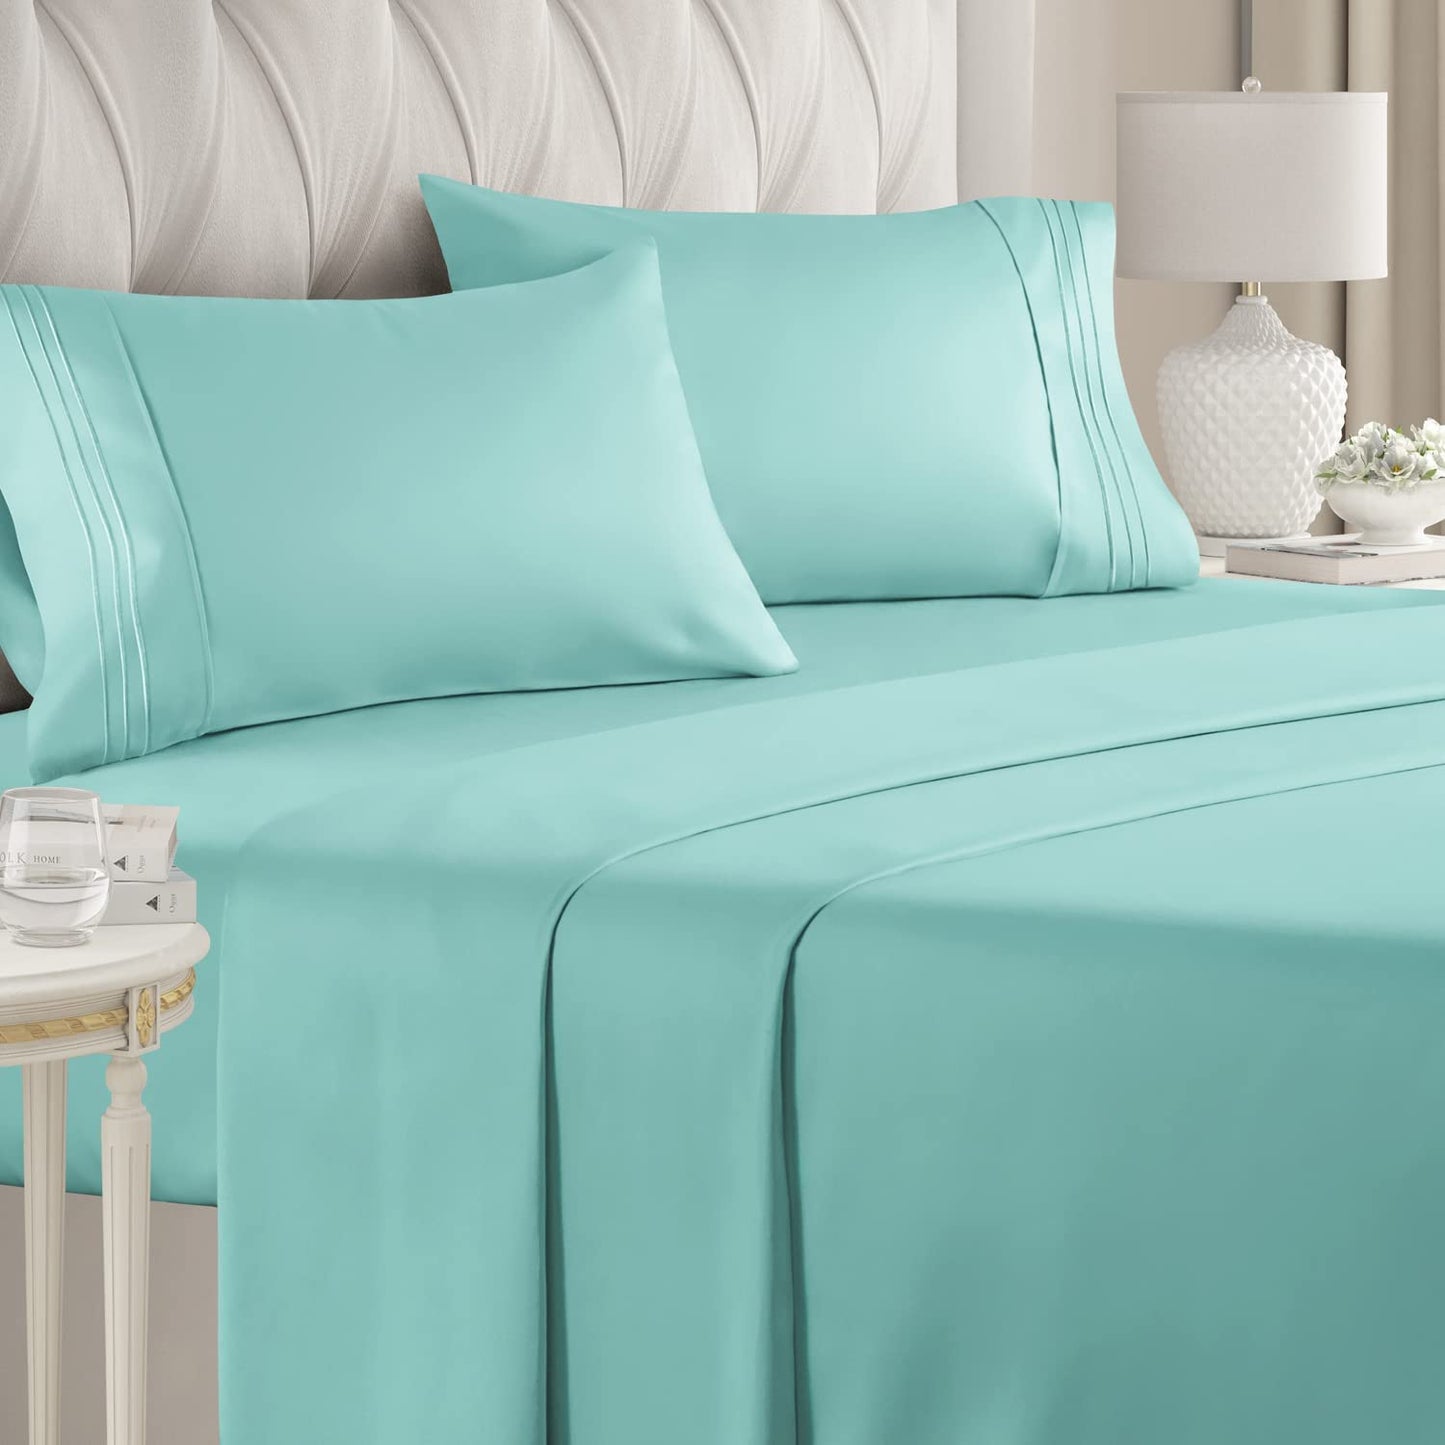 Buy King Size Flat Sheet Aqua Blue Egyptian Cotton 1000 Thread Count at- Egyptianhomelinens.com